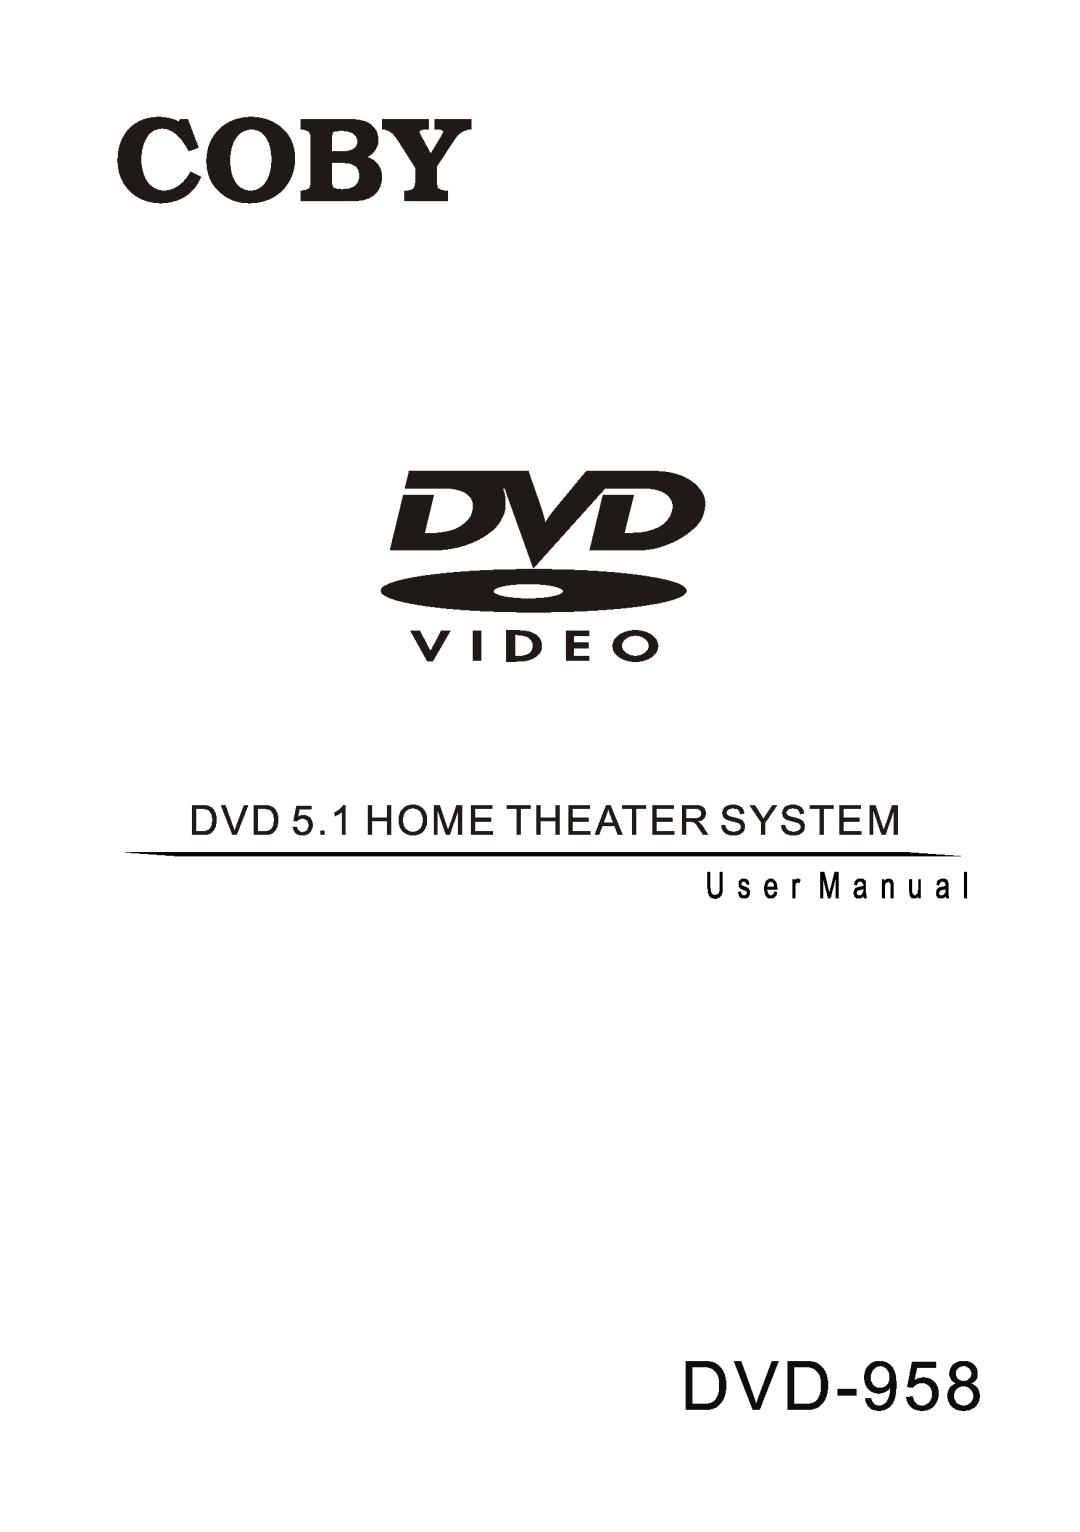 COBY electronic DVD-958 manual DVD 5.1 HOME THEATER SYSTEM 